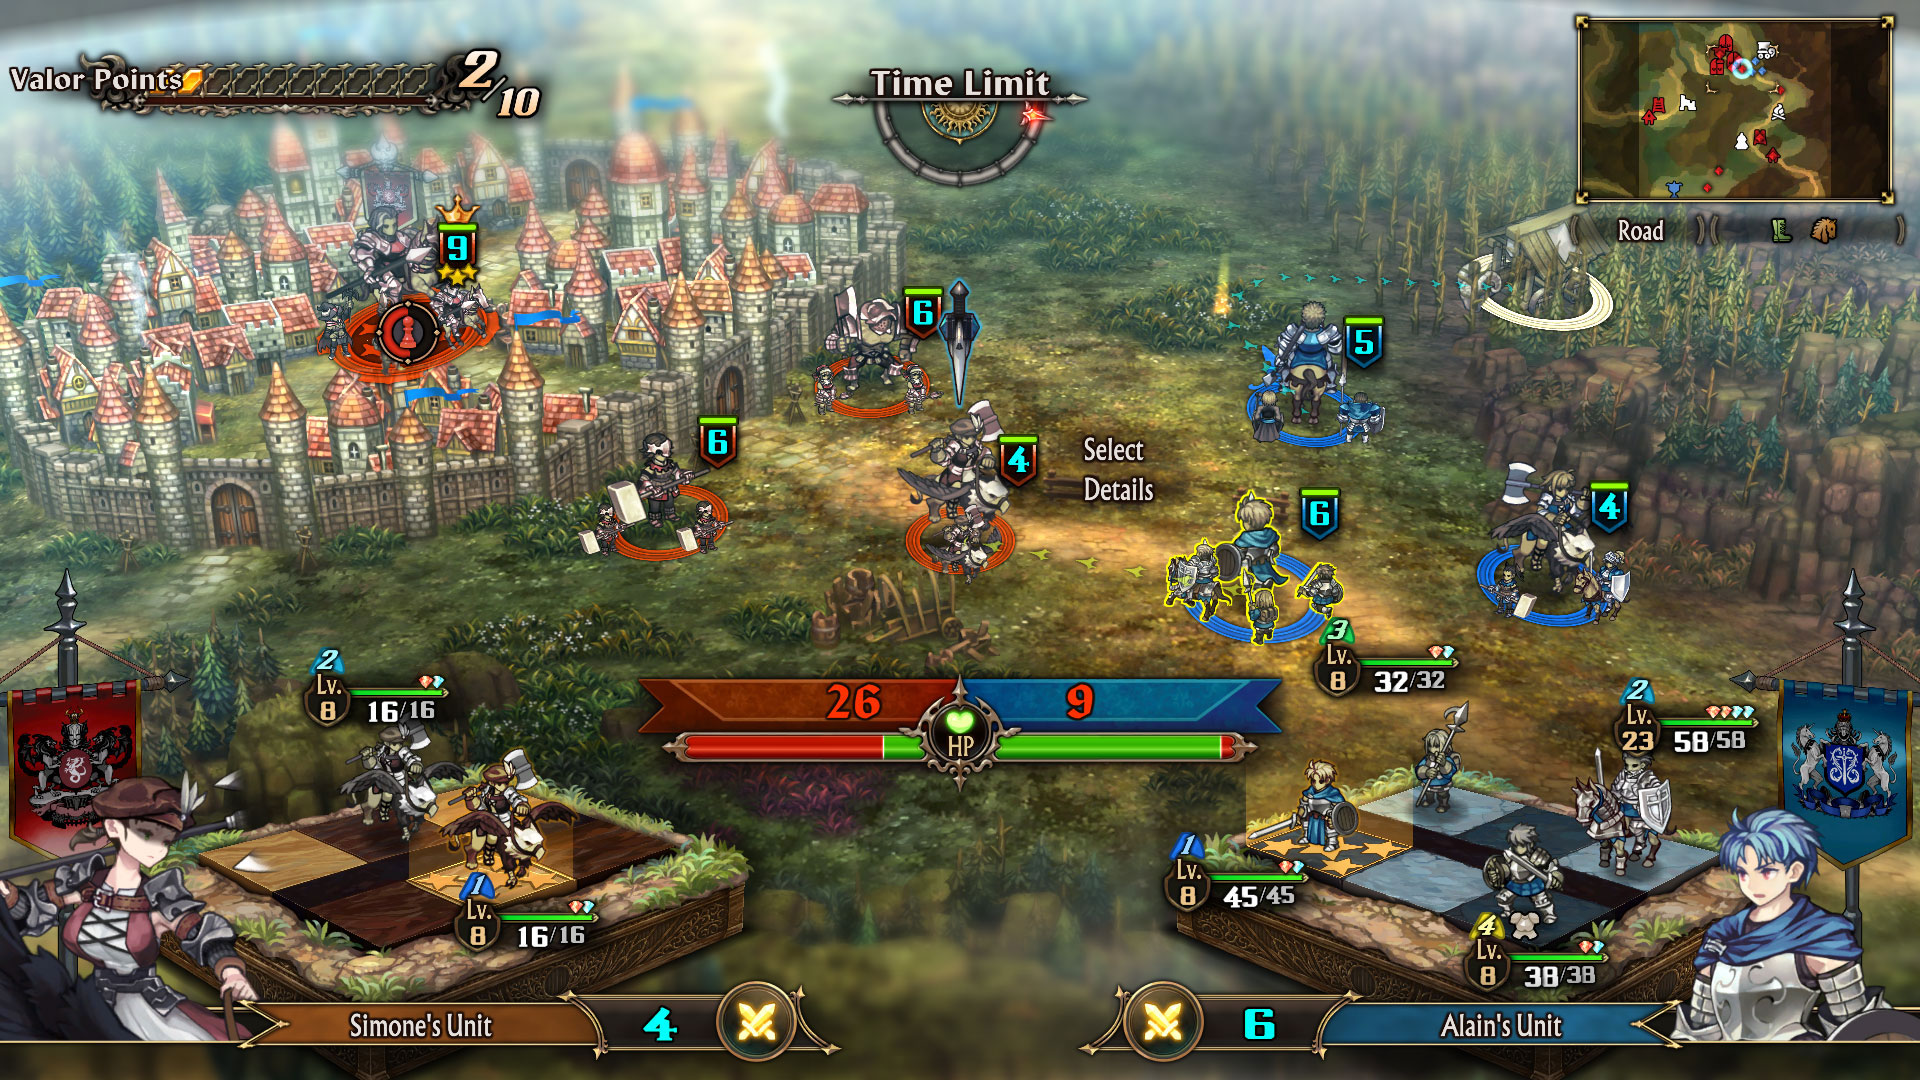 Vanillaware's Unicorn Overlord is now available